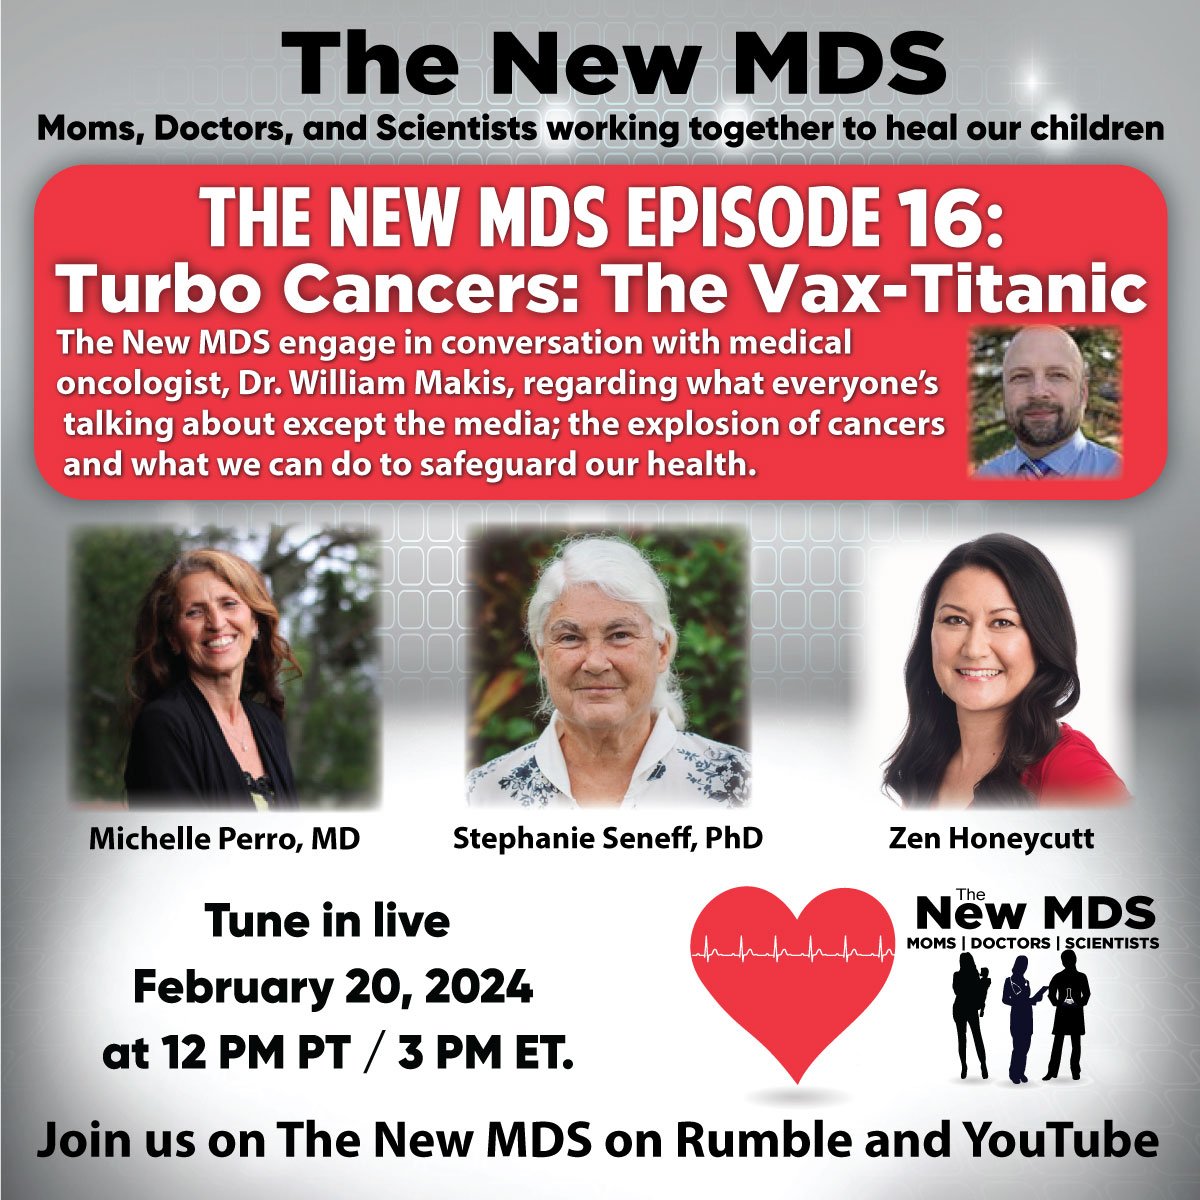 Please join in 2.20.24, 12 Noon PST, as The New MDS (mothers, doctors, and scientists) discuss with @MakisMD: youtube.com/@thenewmds @HighWireTalk @VigilantFox @TheChiefNerd @BLNewsMedia @TuckerCarlson @joerogan @twc_health @yesmaam74 @stephanieseneff @goldie6175